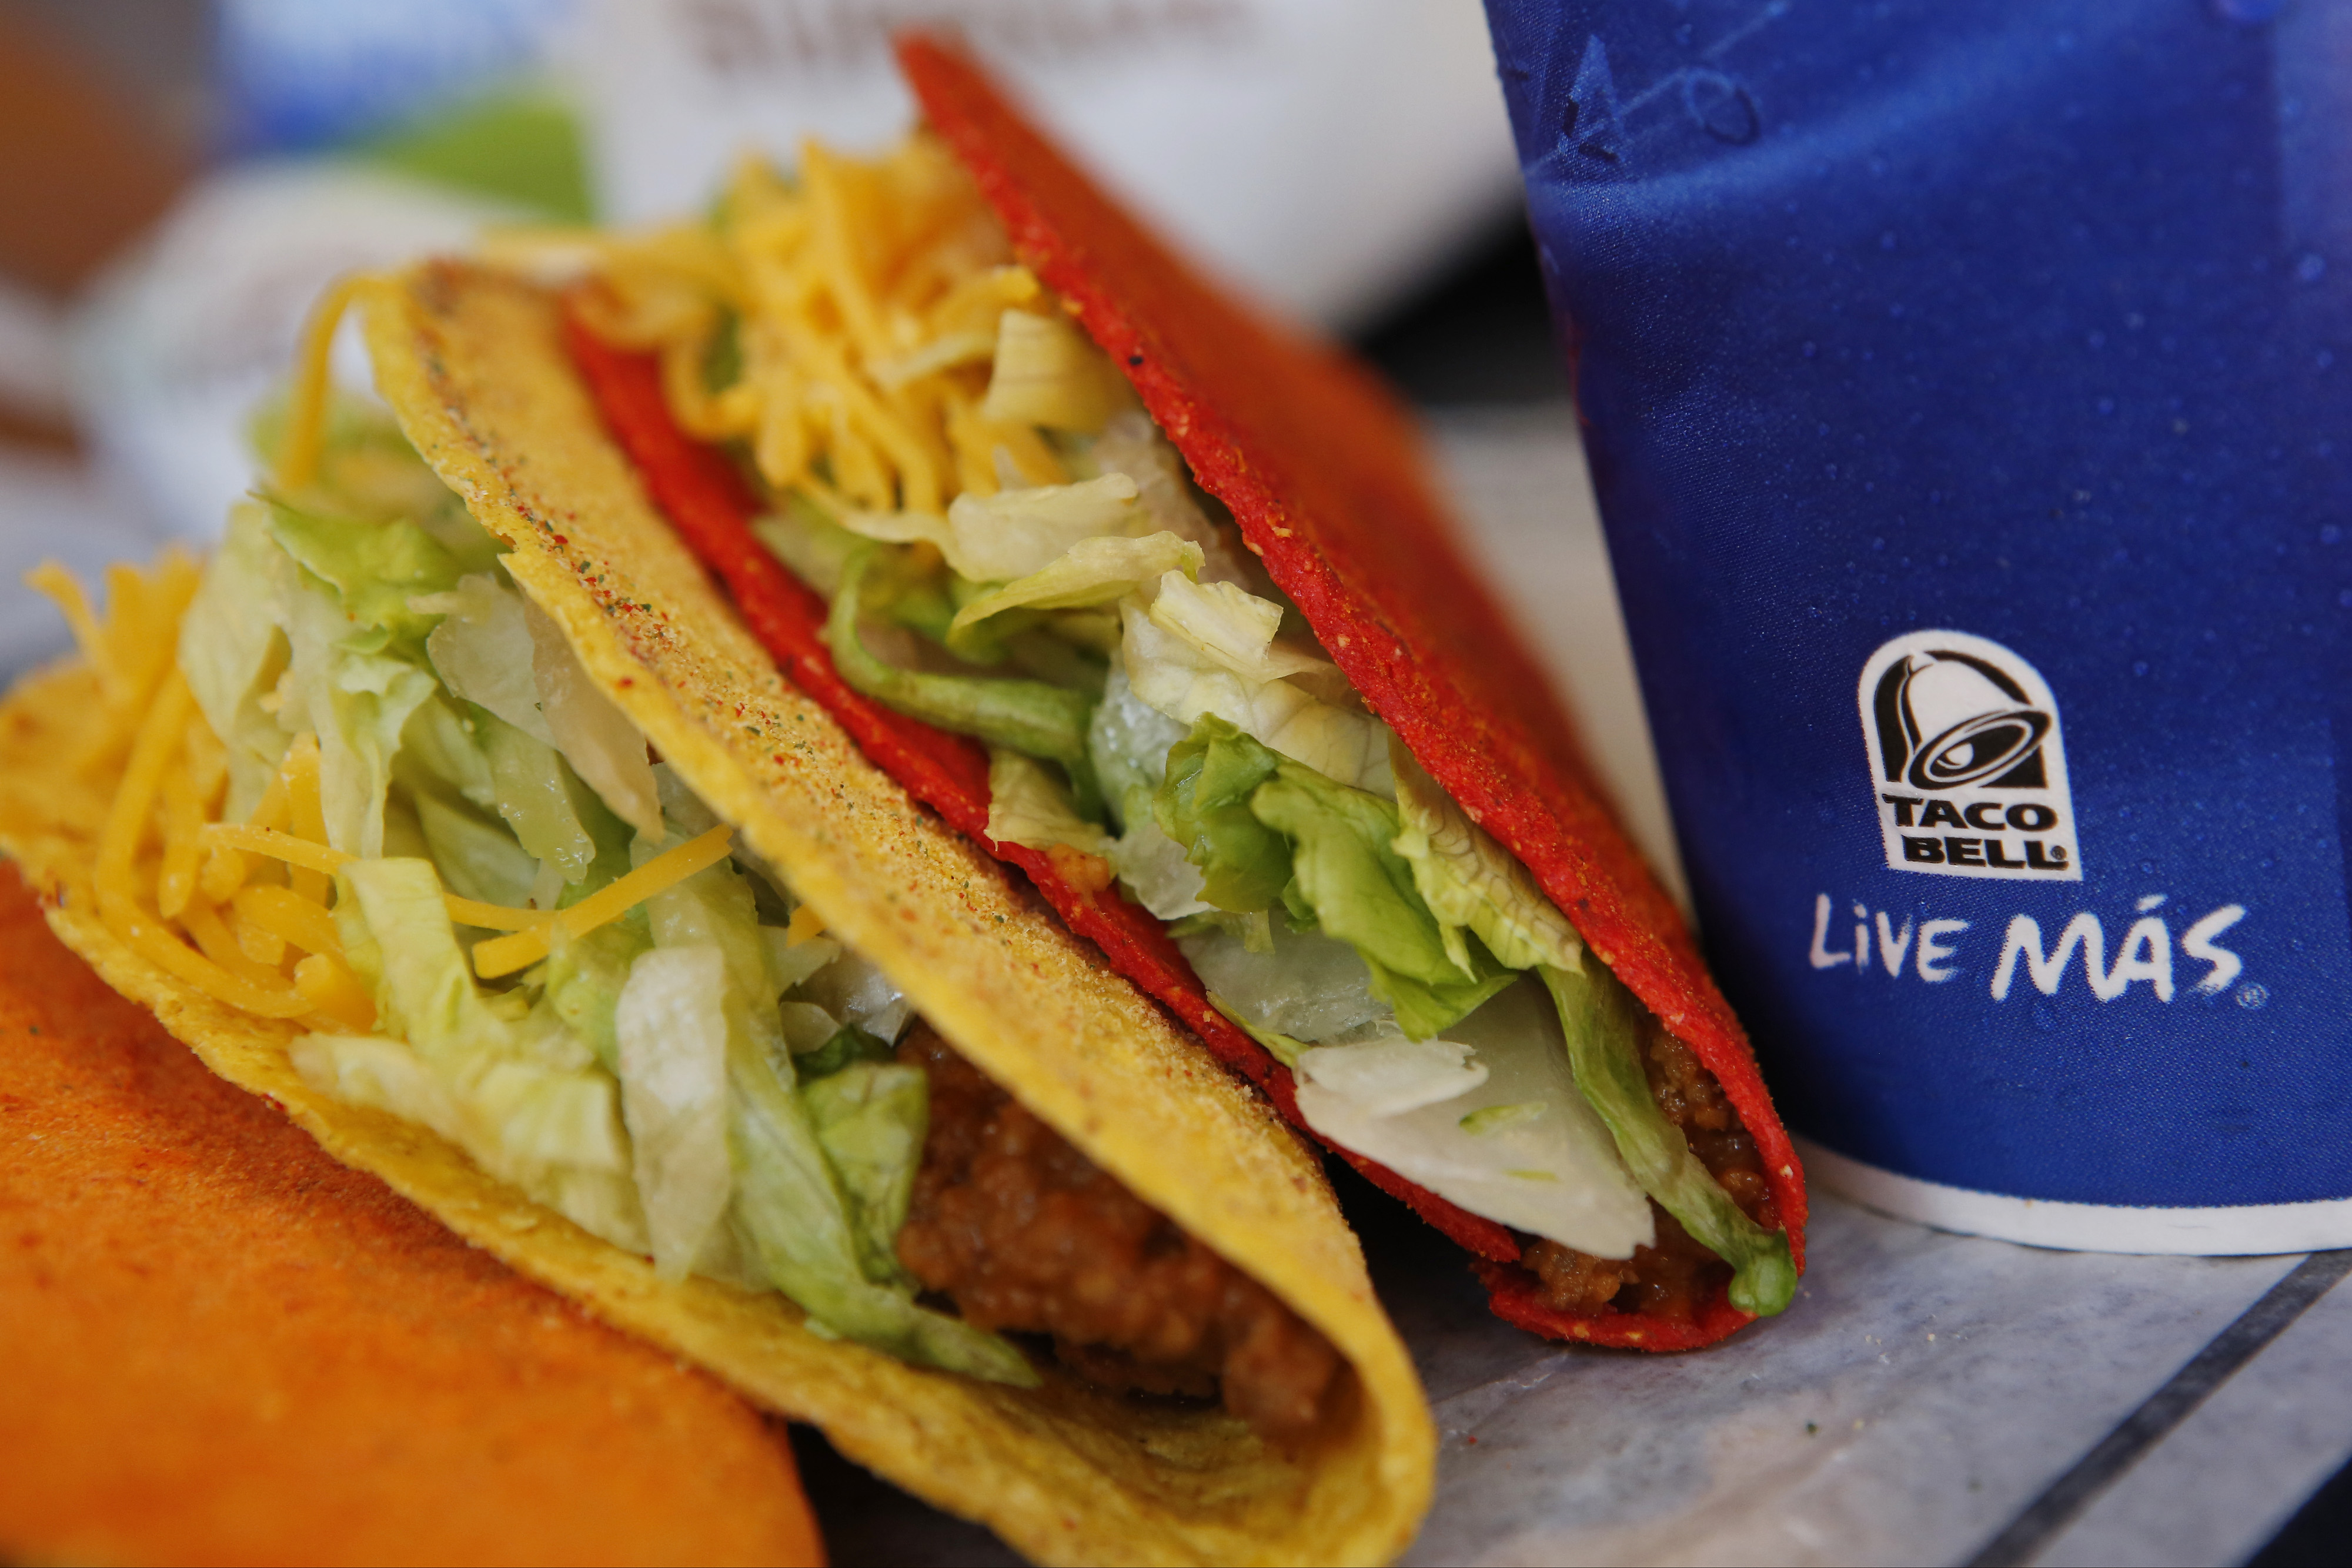 Thanks to the Golden State Warriors, Taco Bell is Giving Away Free Tacos on June 21